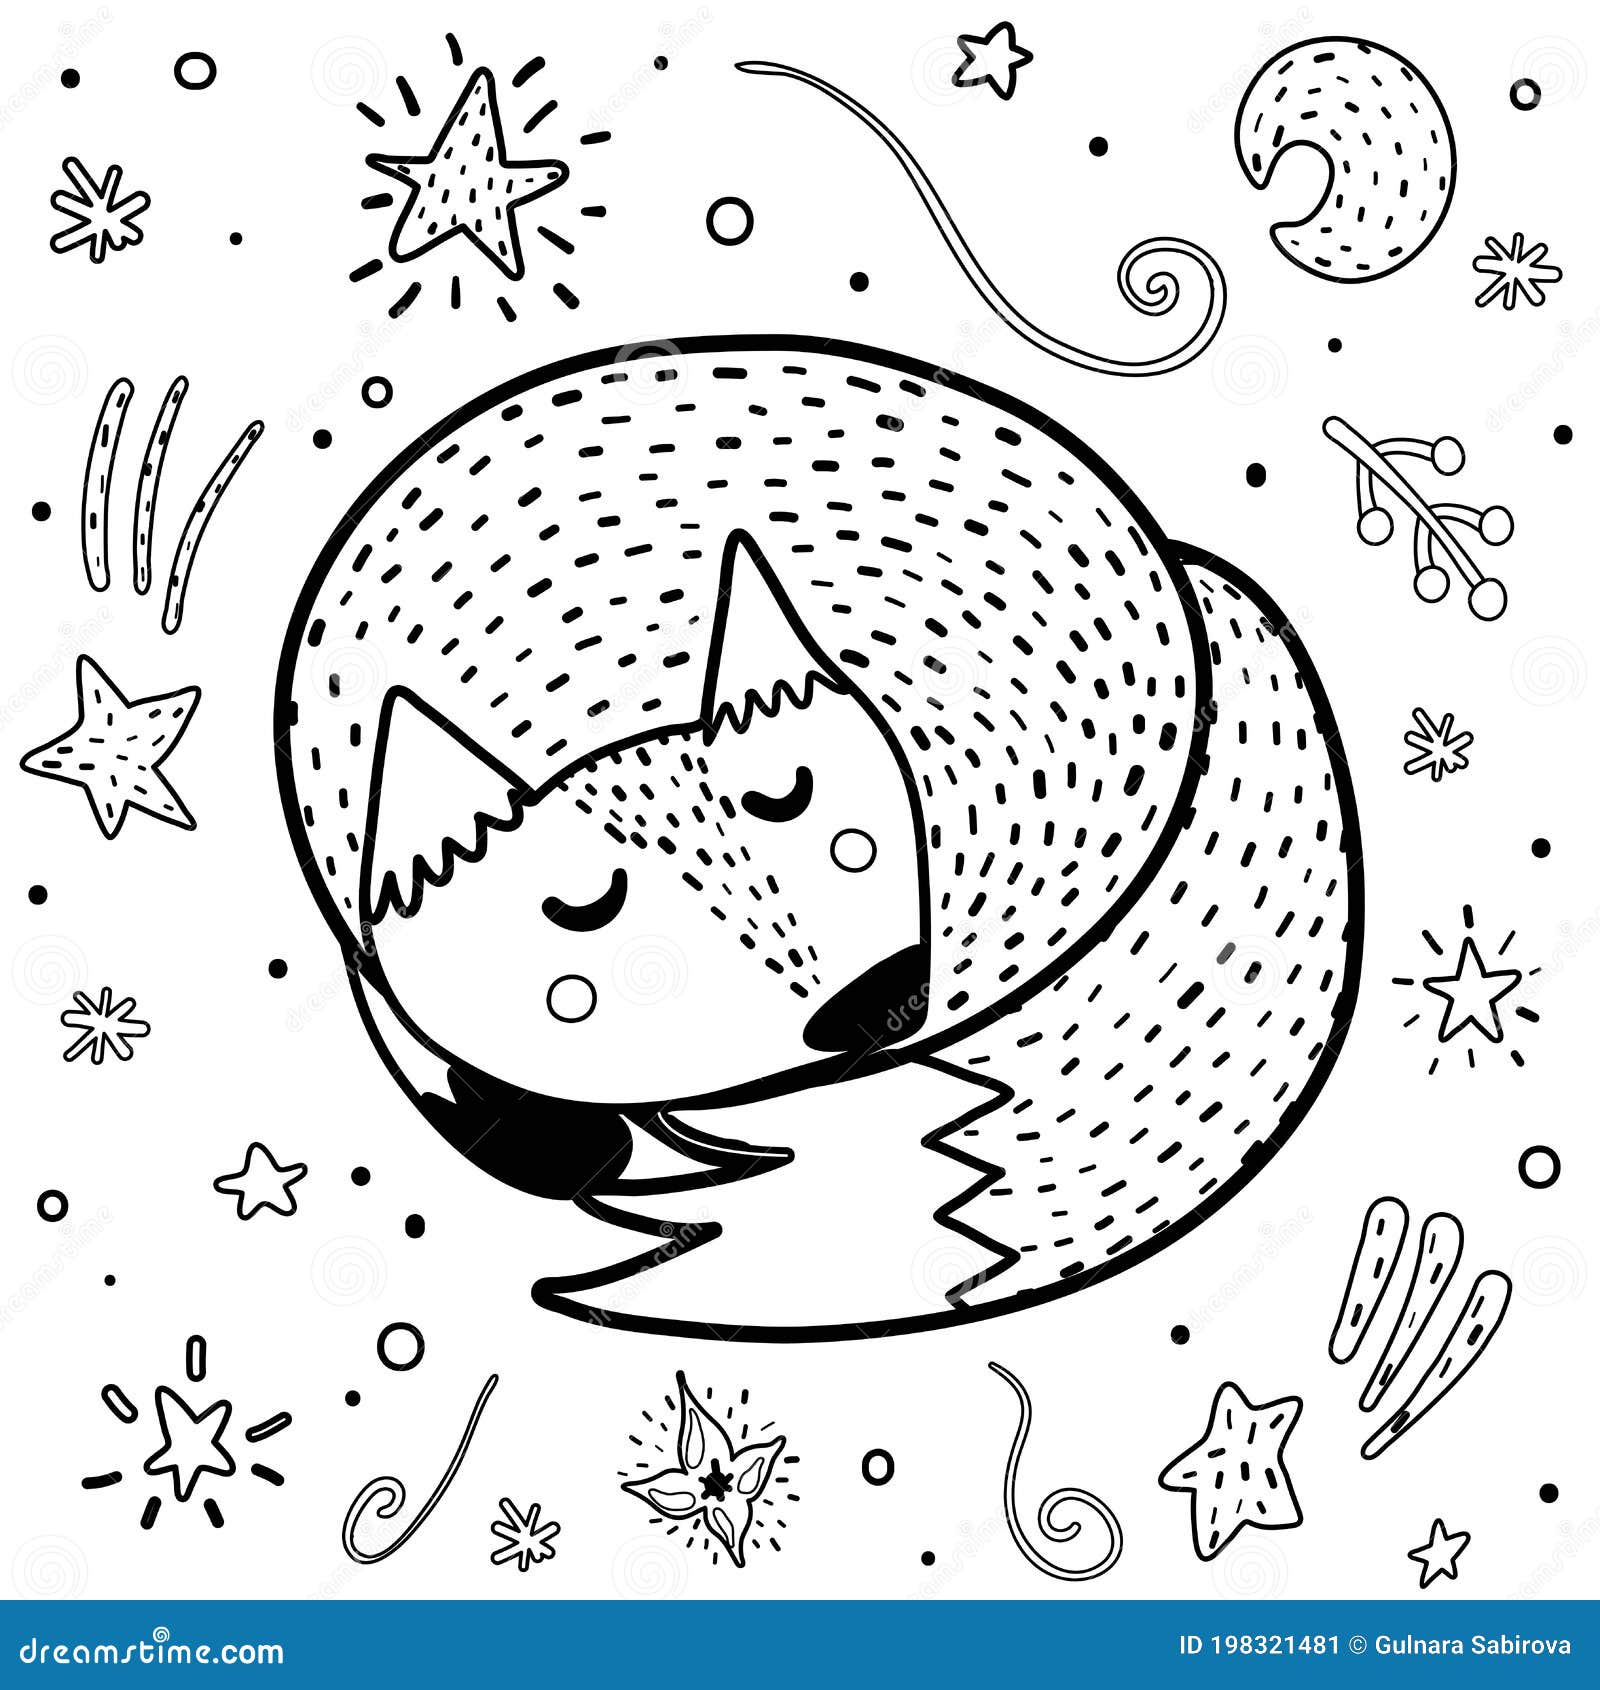 Cute Sleeping Fox Coloring Page. Black and White Print with Funny ...